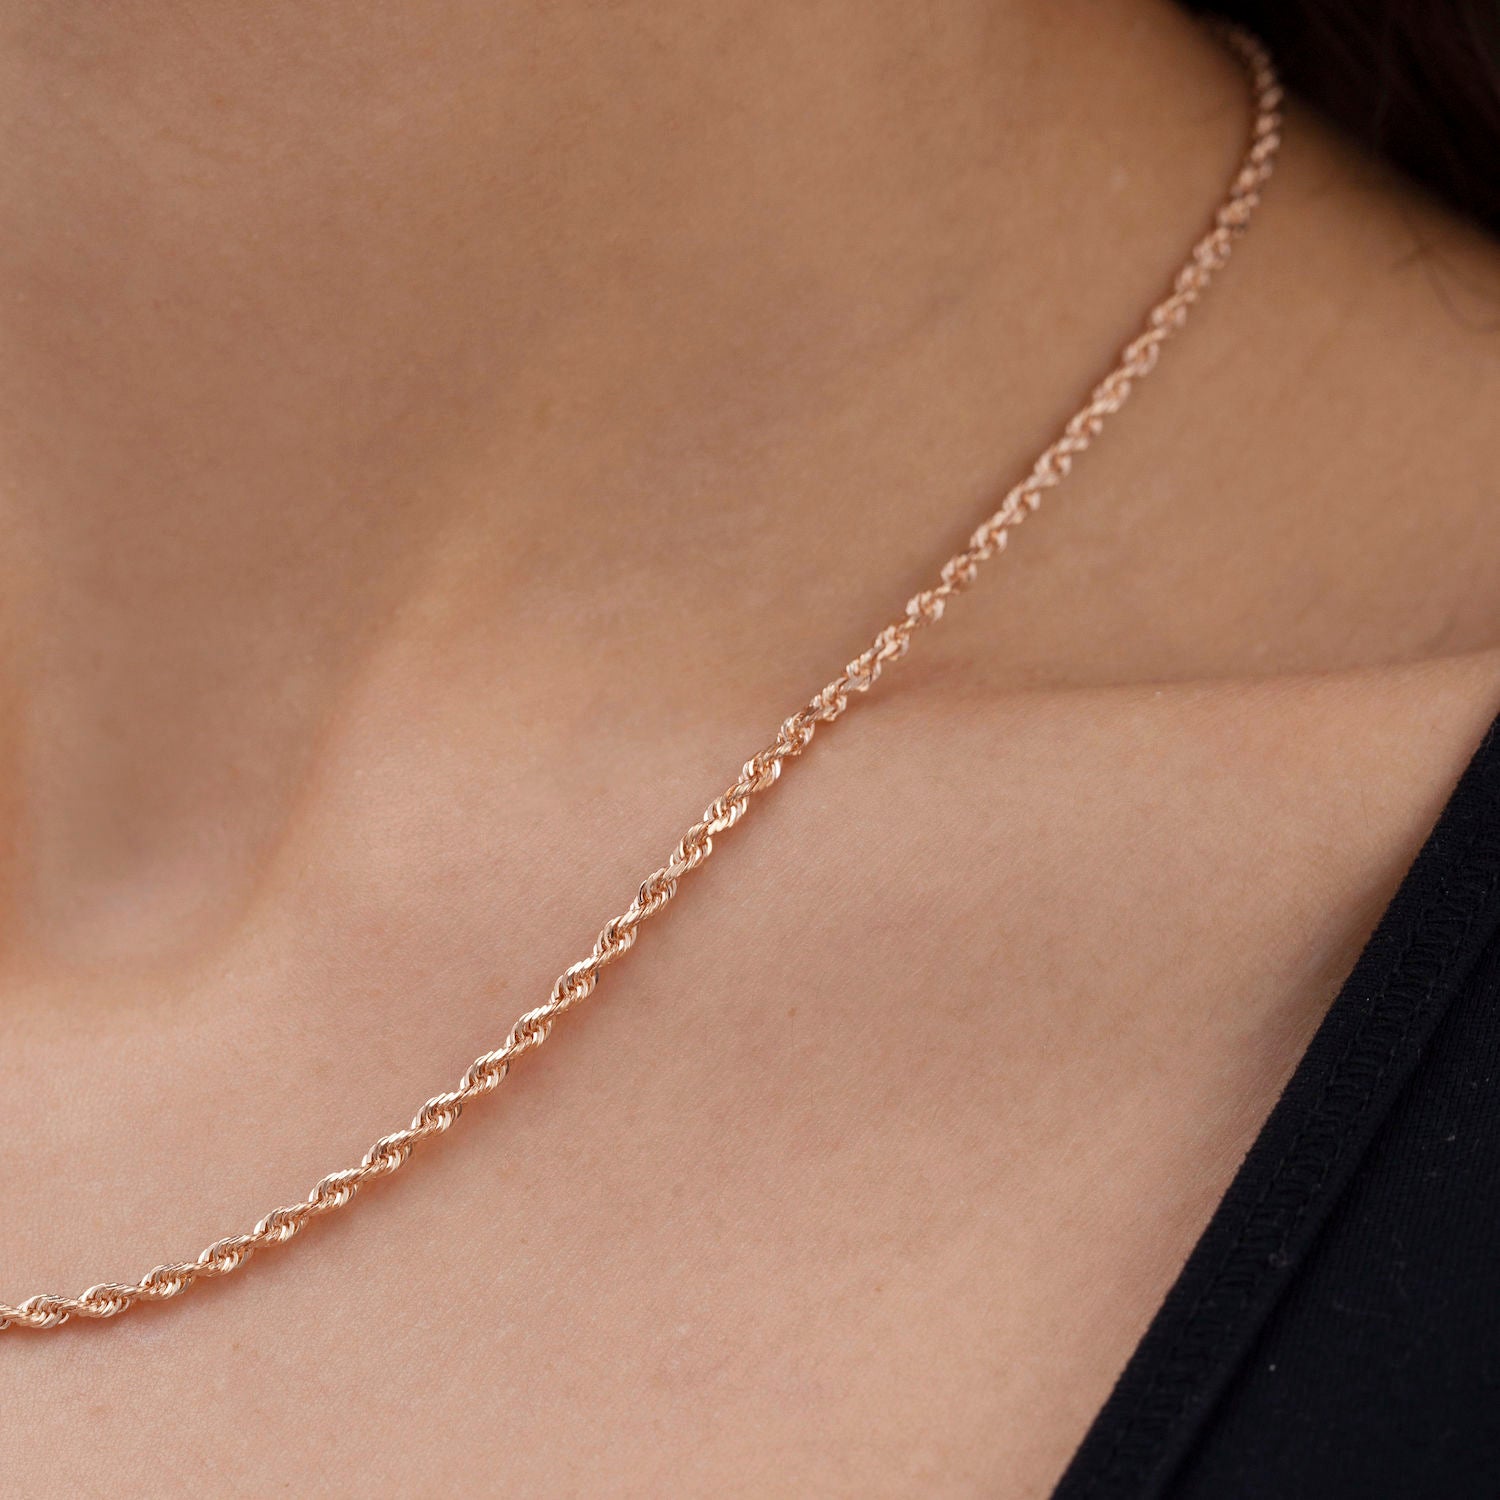 14k rose gold rope chain